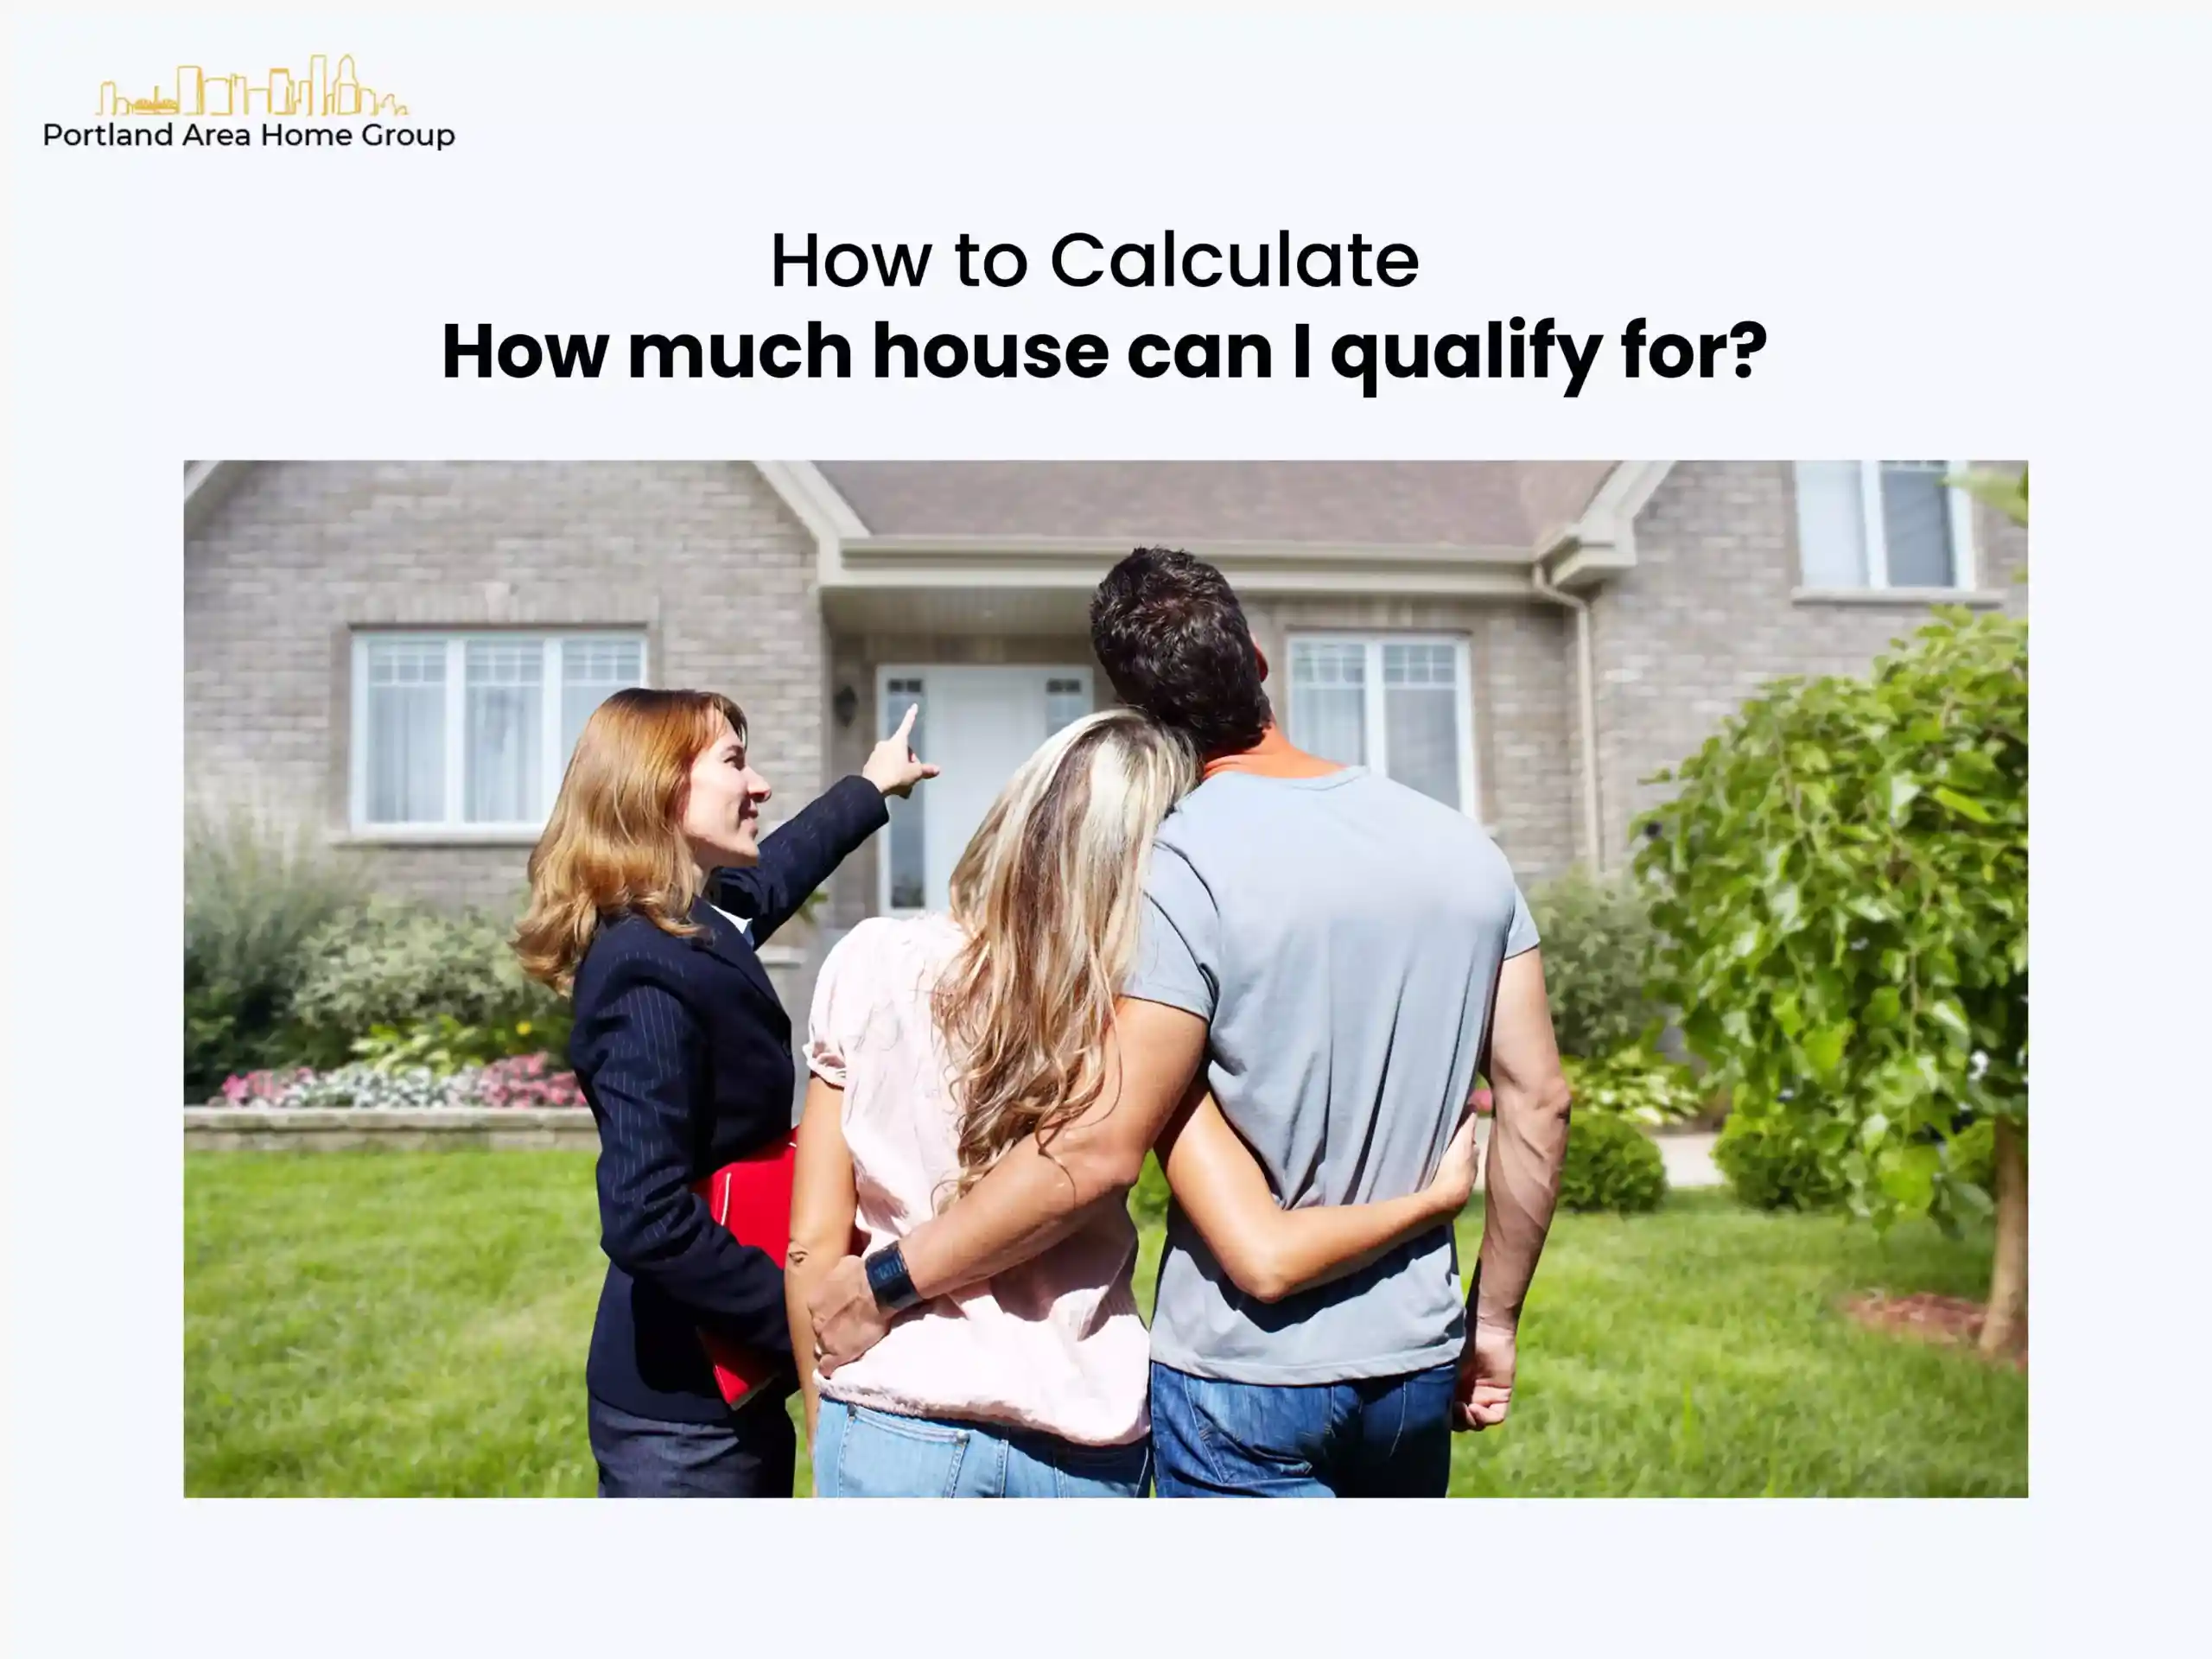 How To Calculate How Much House Can You Qualify For?